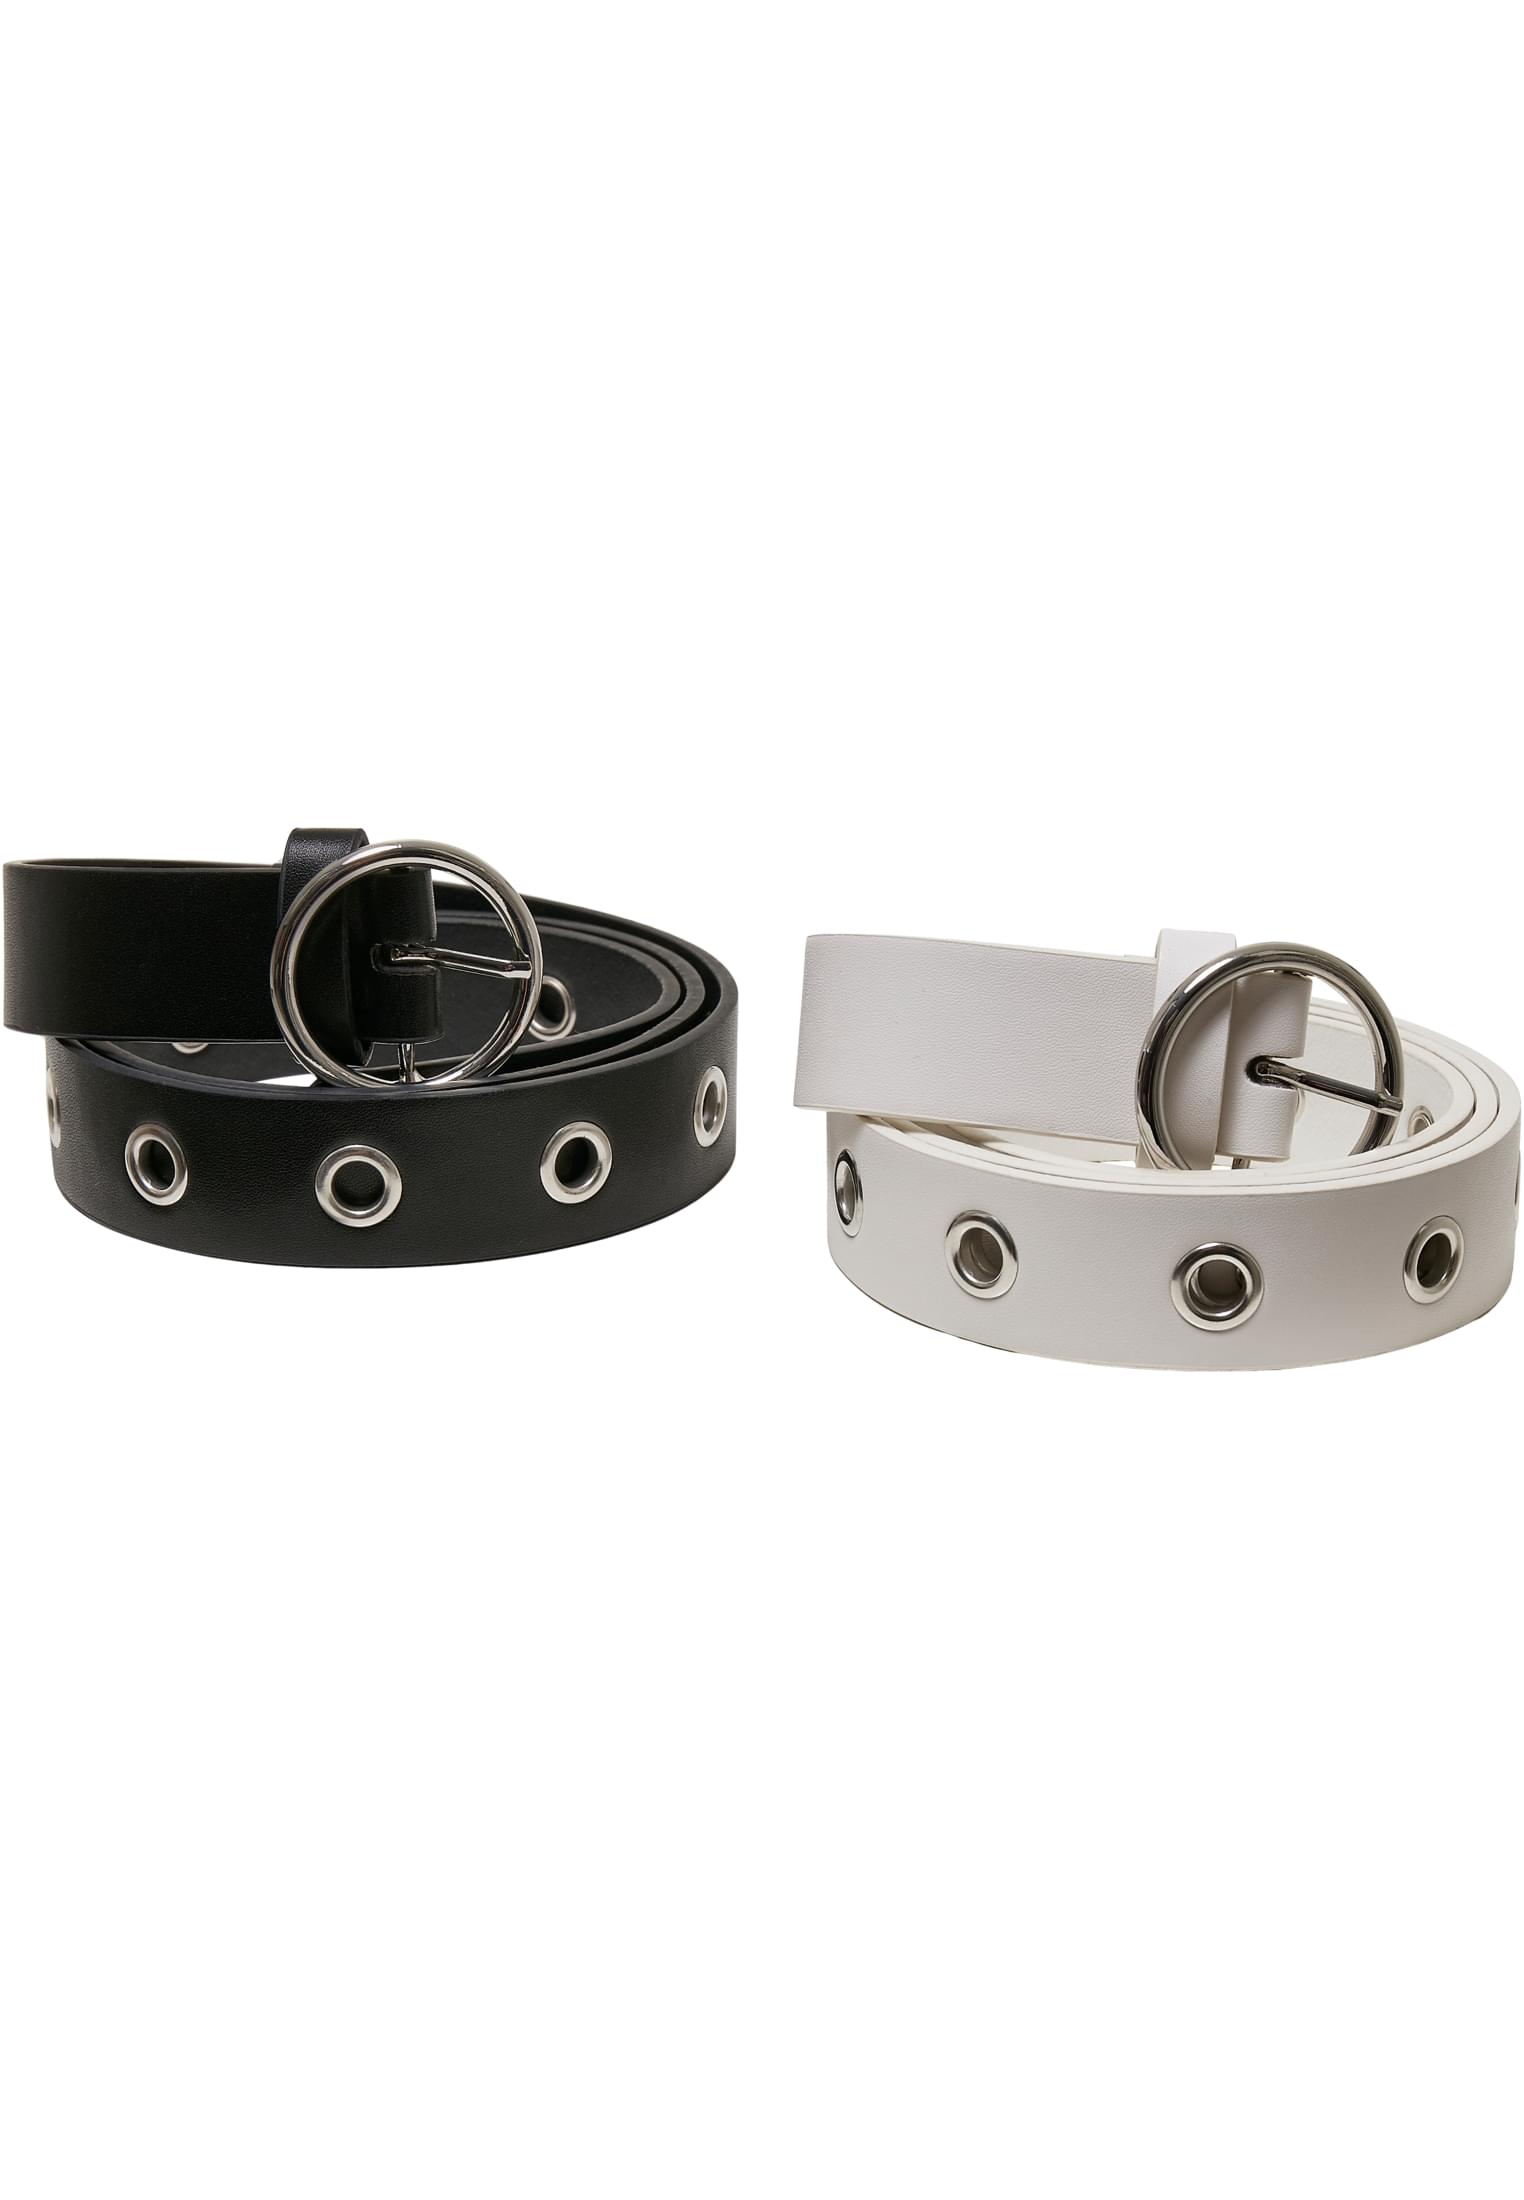 2-Pack-TB5133 Belt Eyelet Synthetic Leather